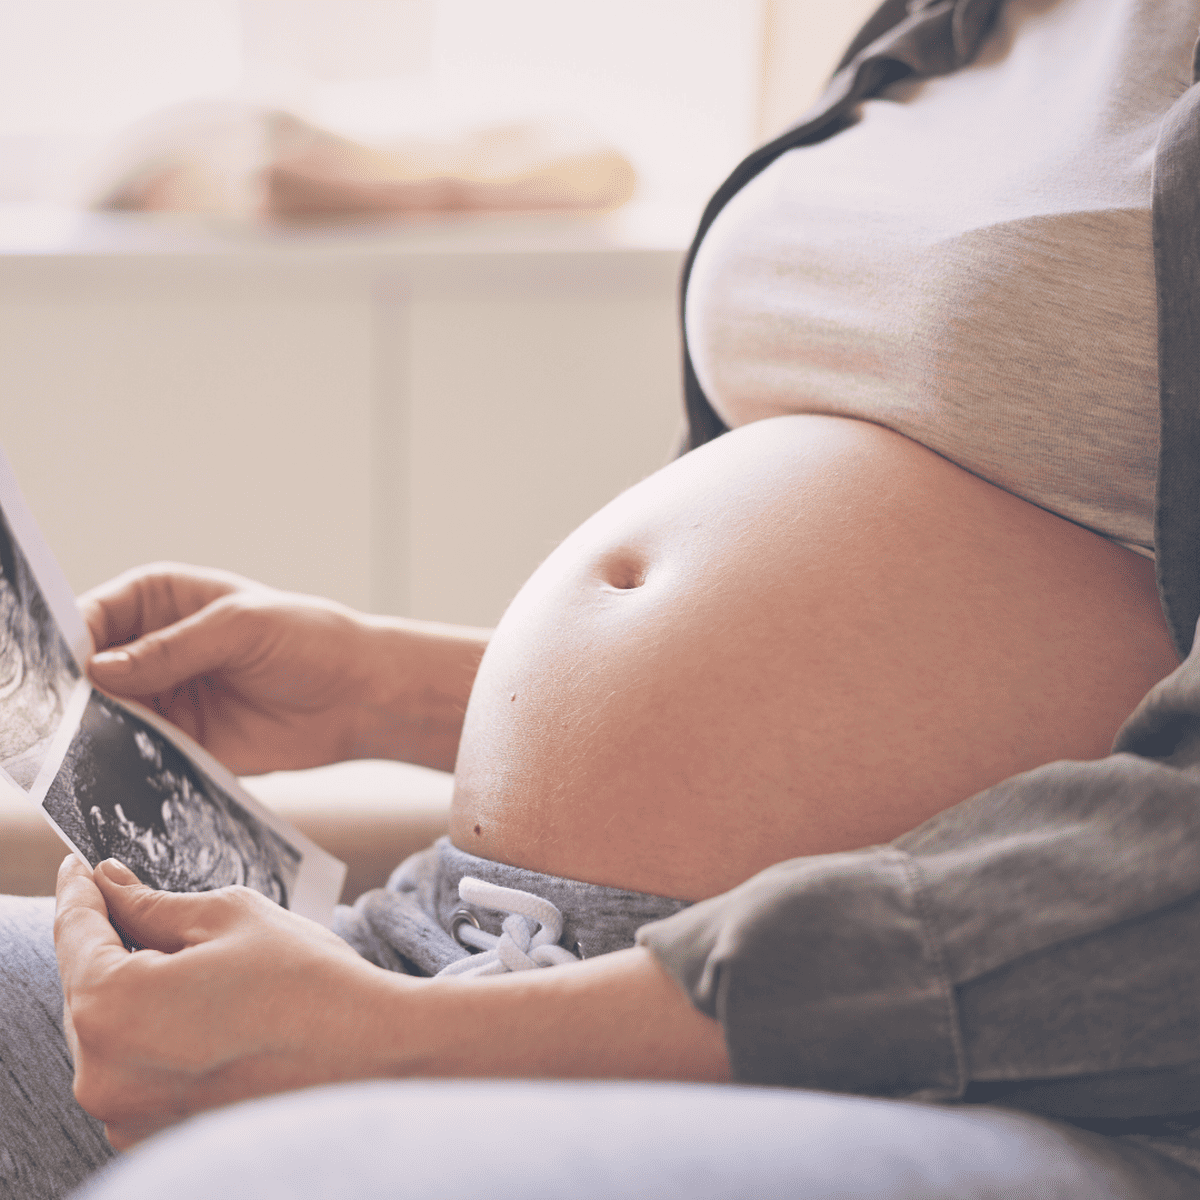 A woman sitting with her pregnant belly showing, looking at a printed sonogram image.